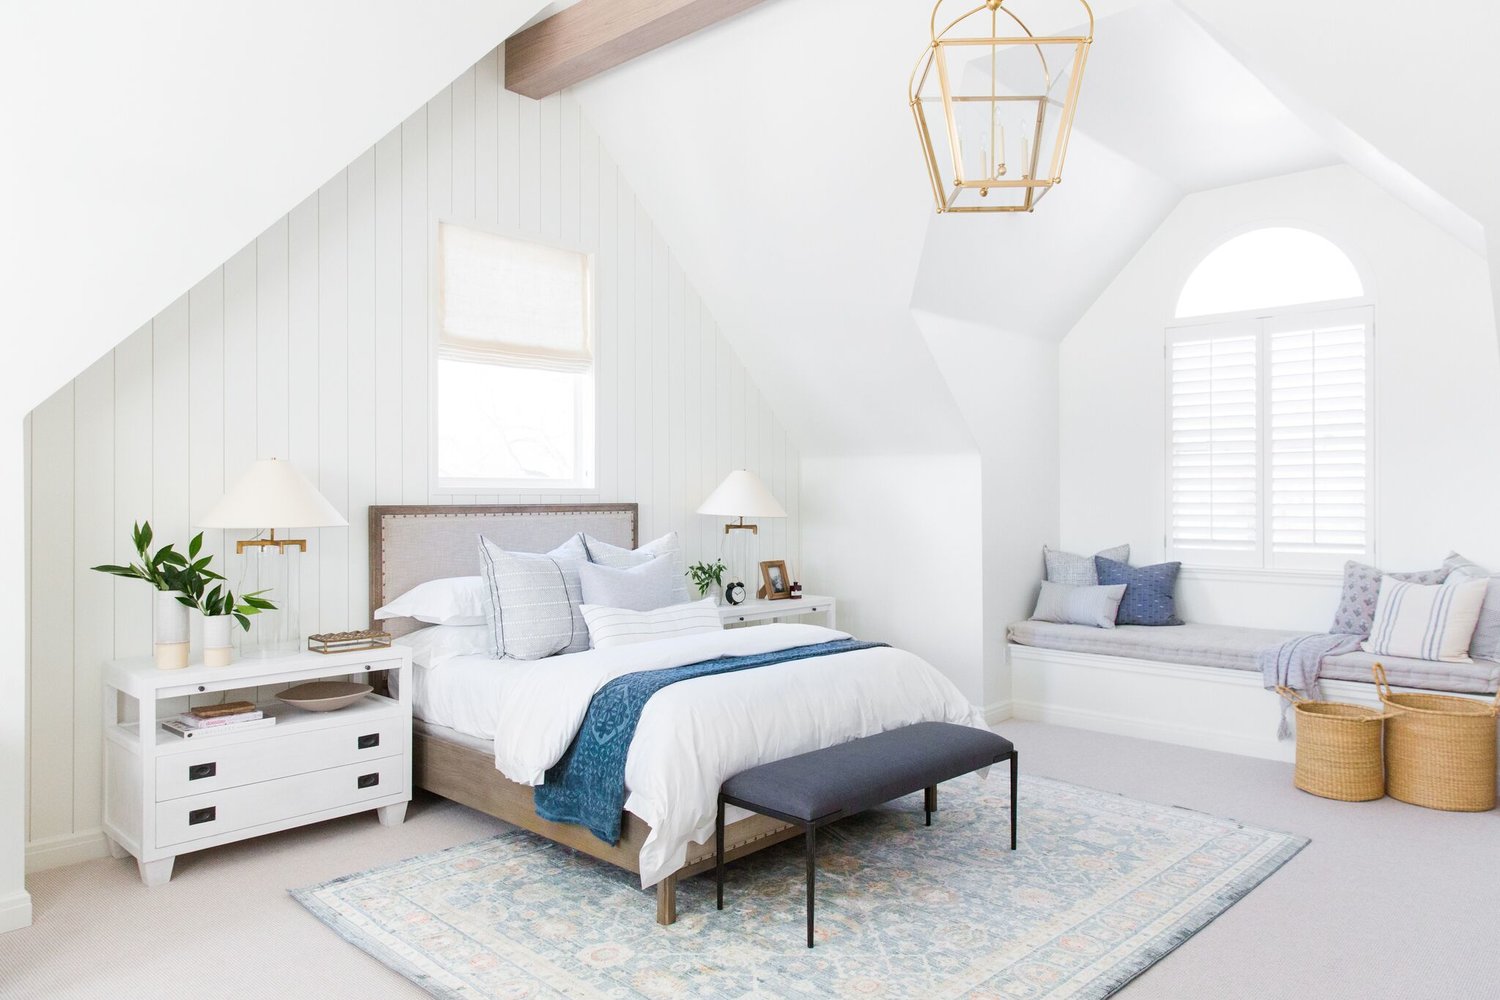 Bedroom sanctuary in attic with window seating